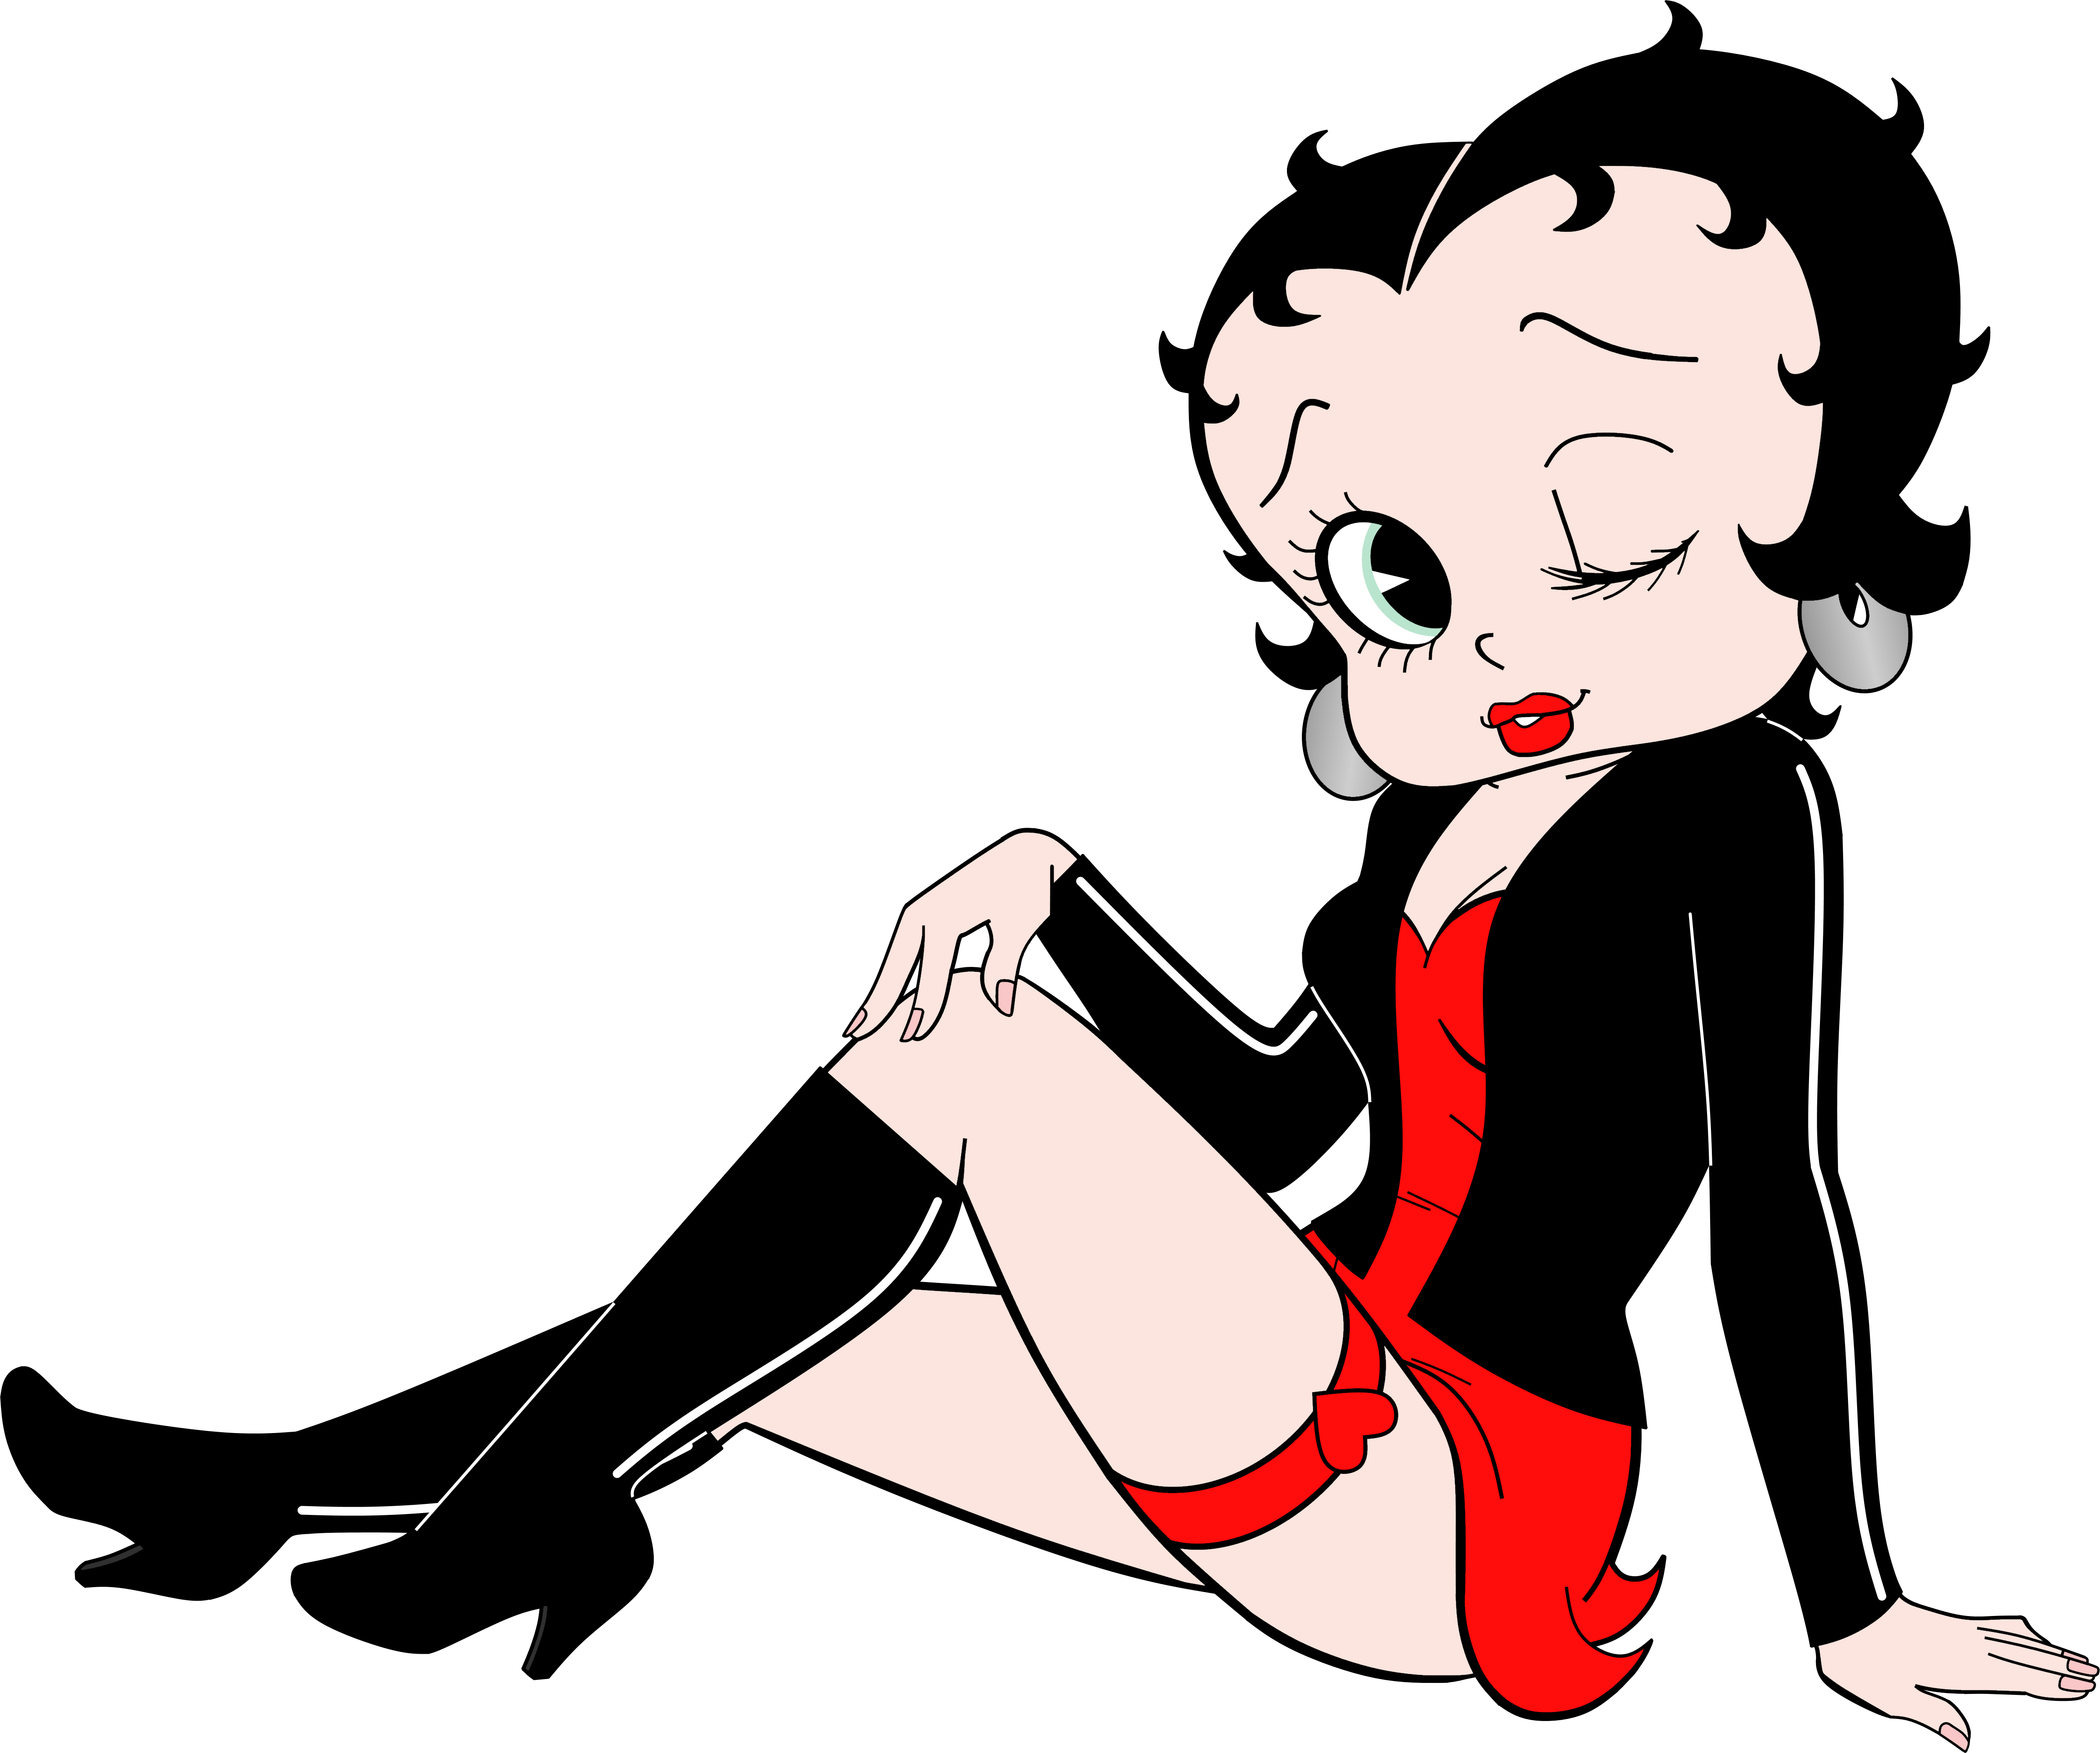 Betty Boop Images on Fanpop.